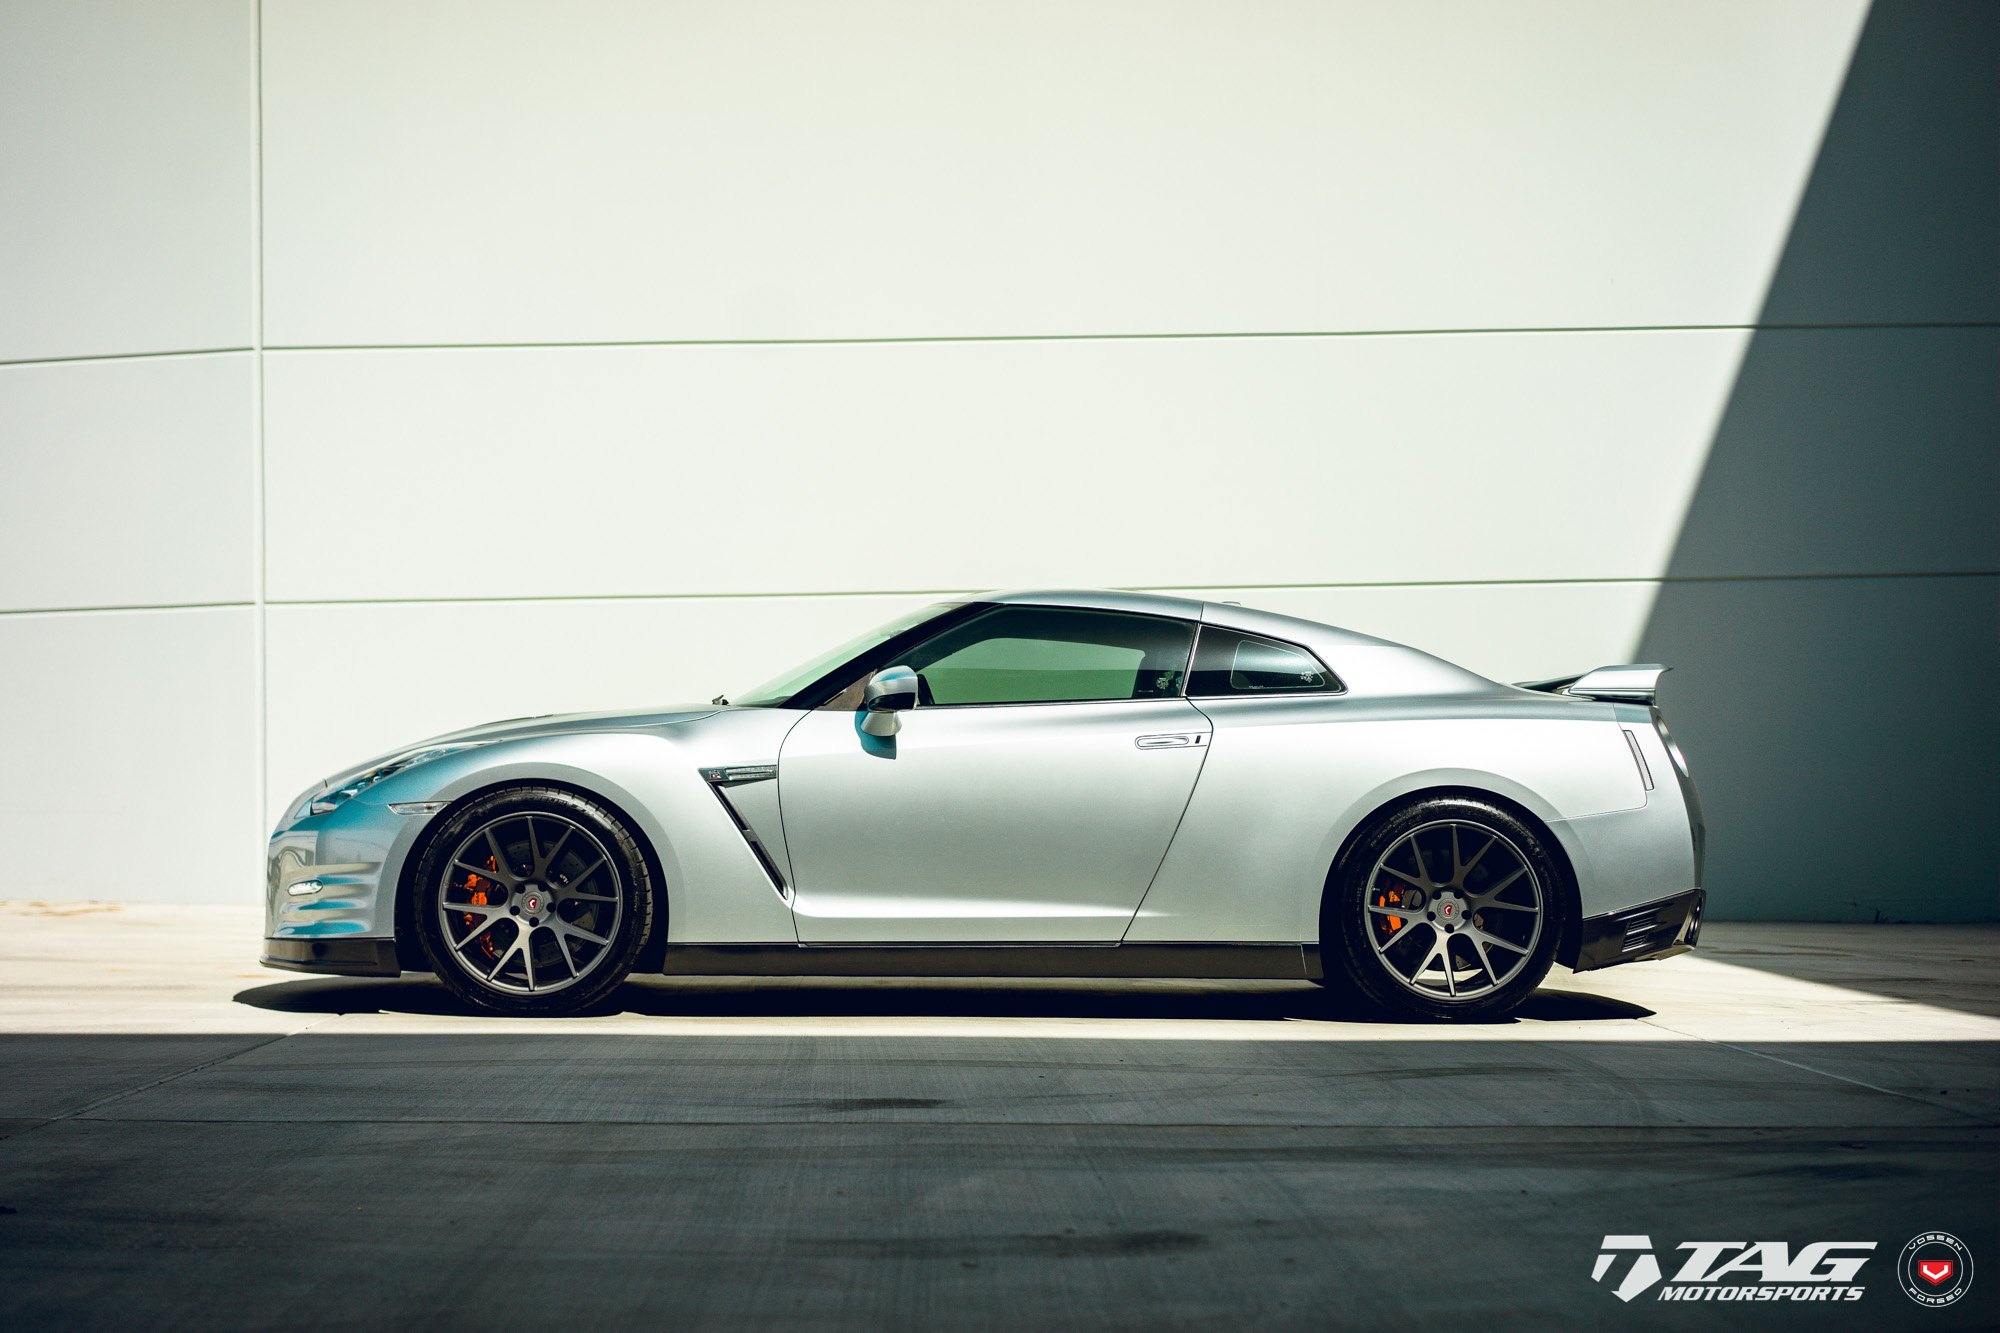 Silver Nissan GT-R with Aftermarket Side Skirts - Photo by Vossen